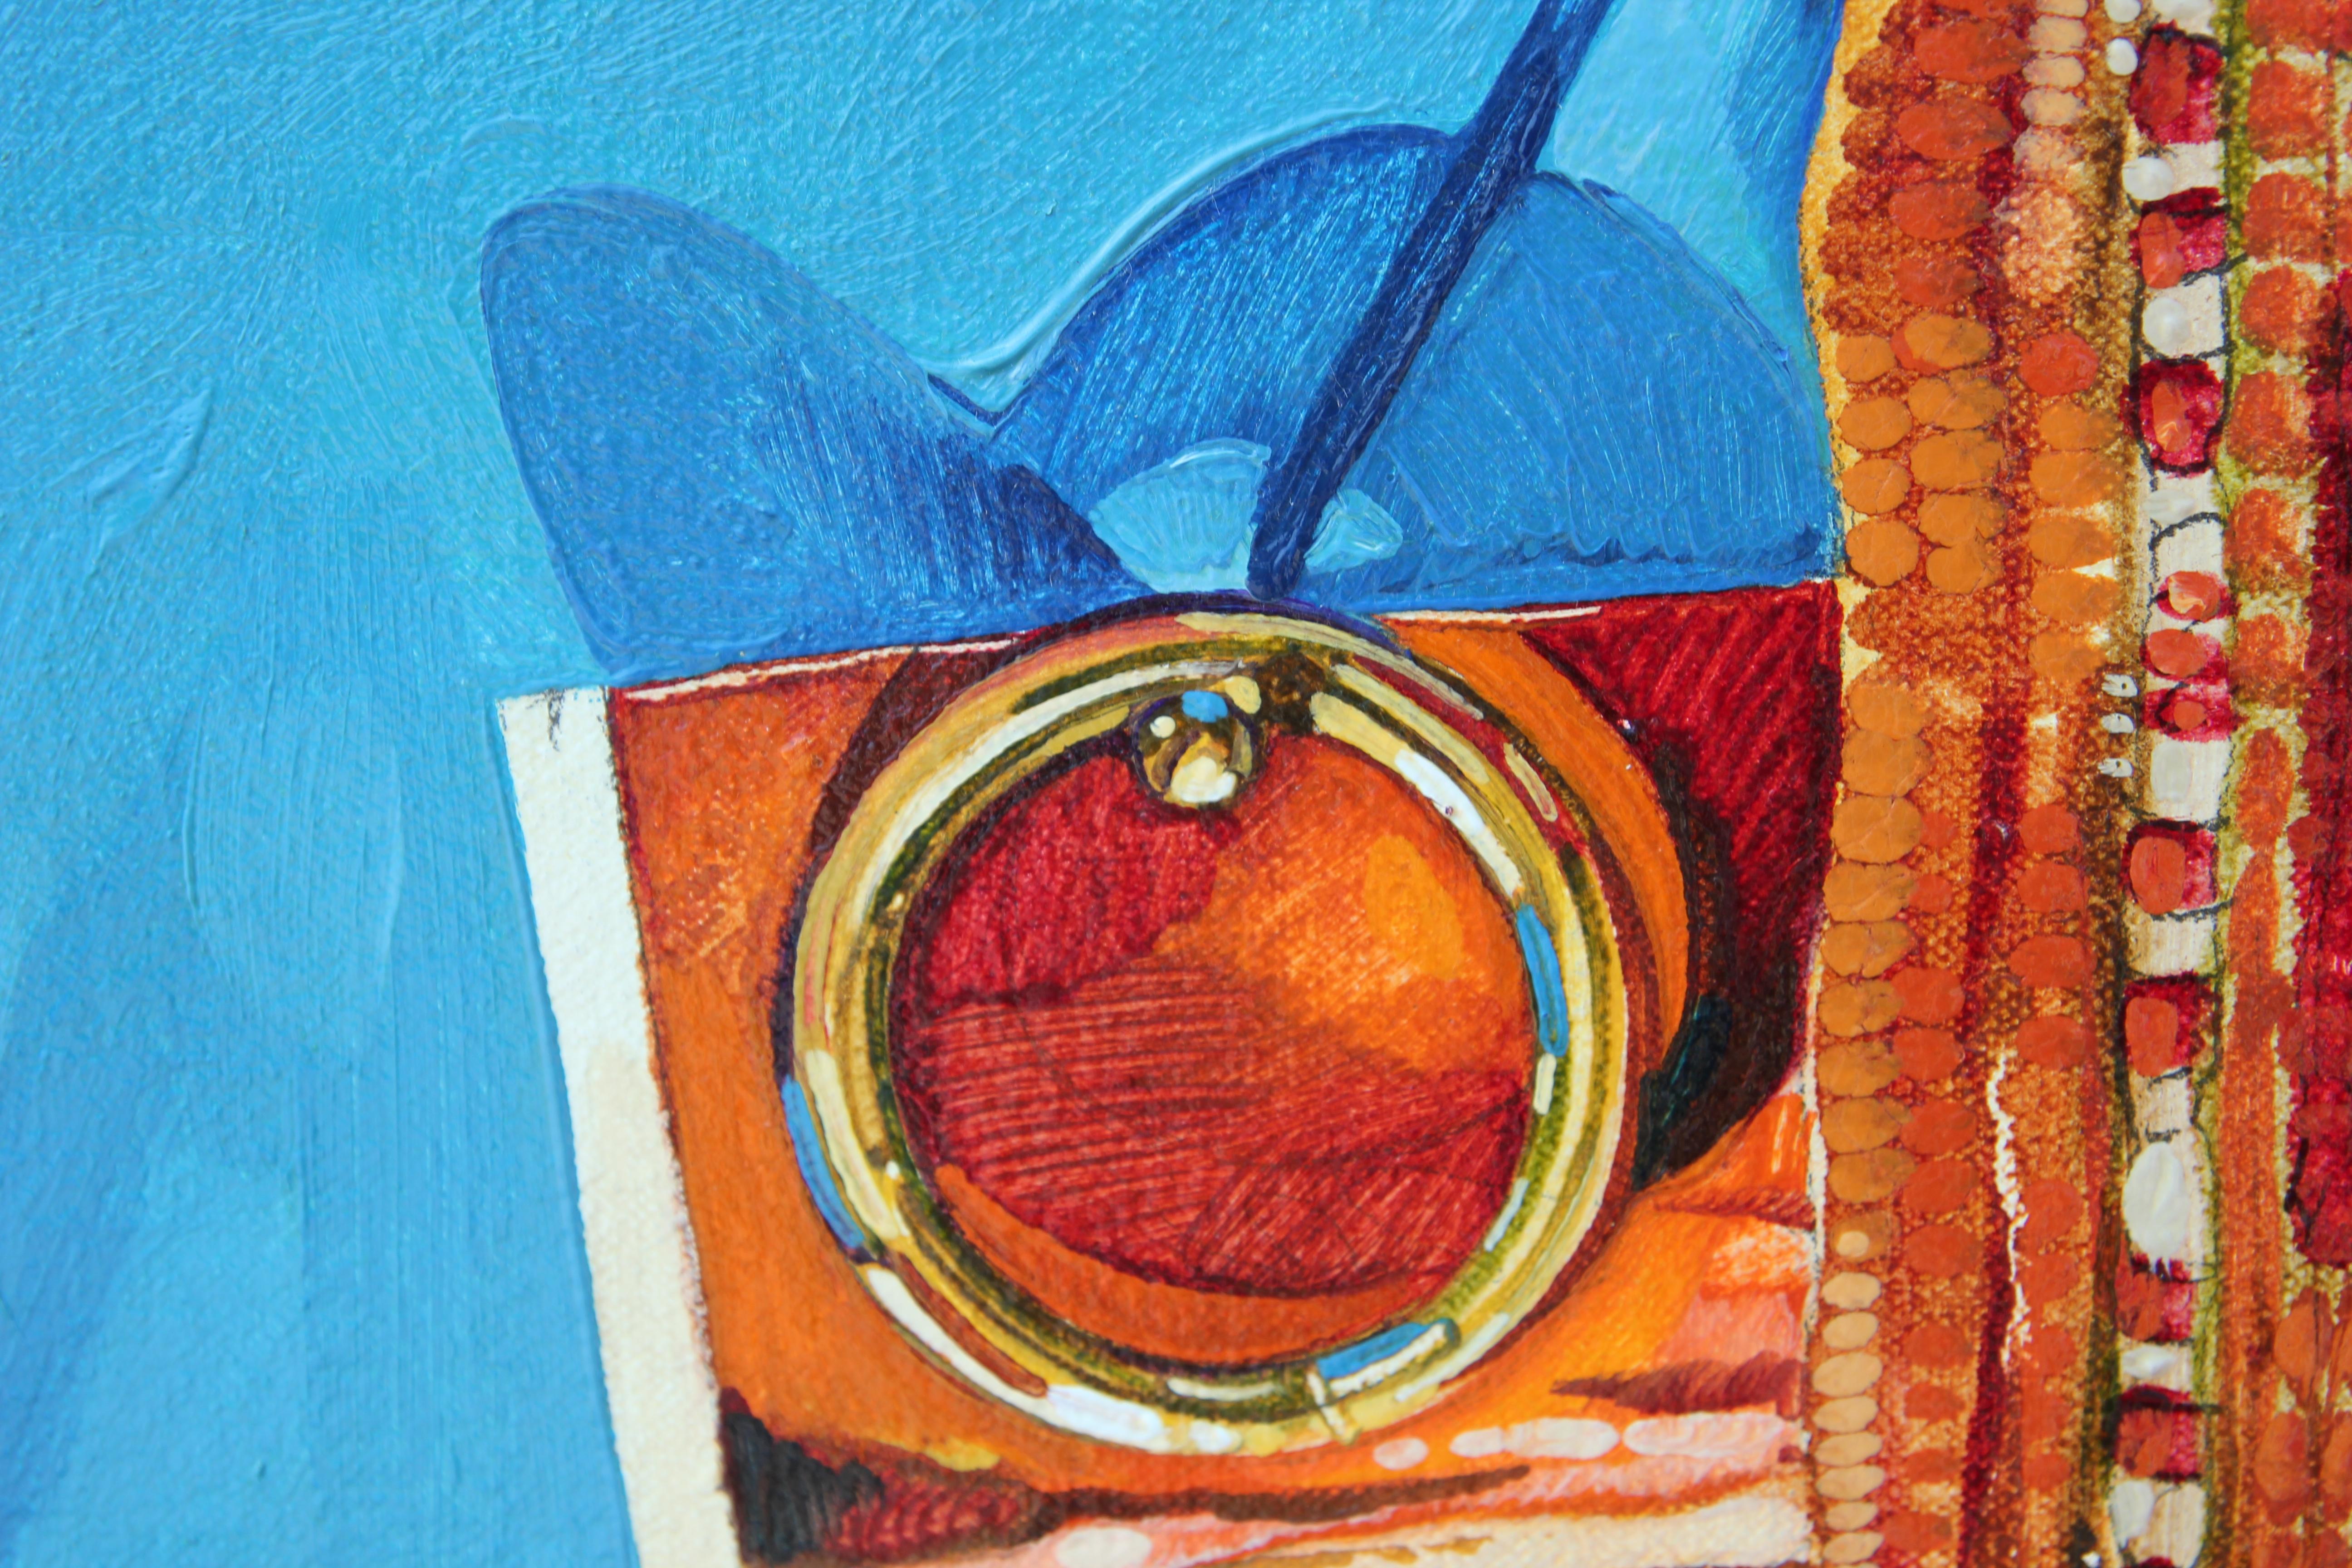 “Rug With Ring” Abstract Realist Blue and Orange Patterned Textile Still Life  - Gray Abstract Painting by John Fincher